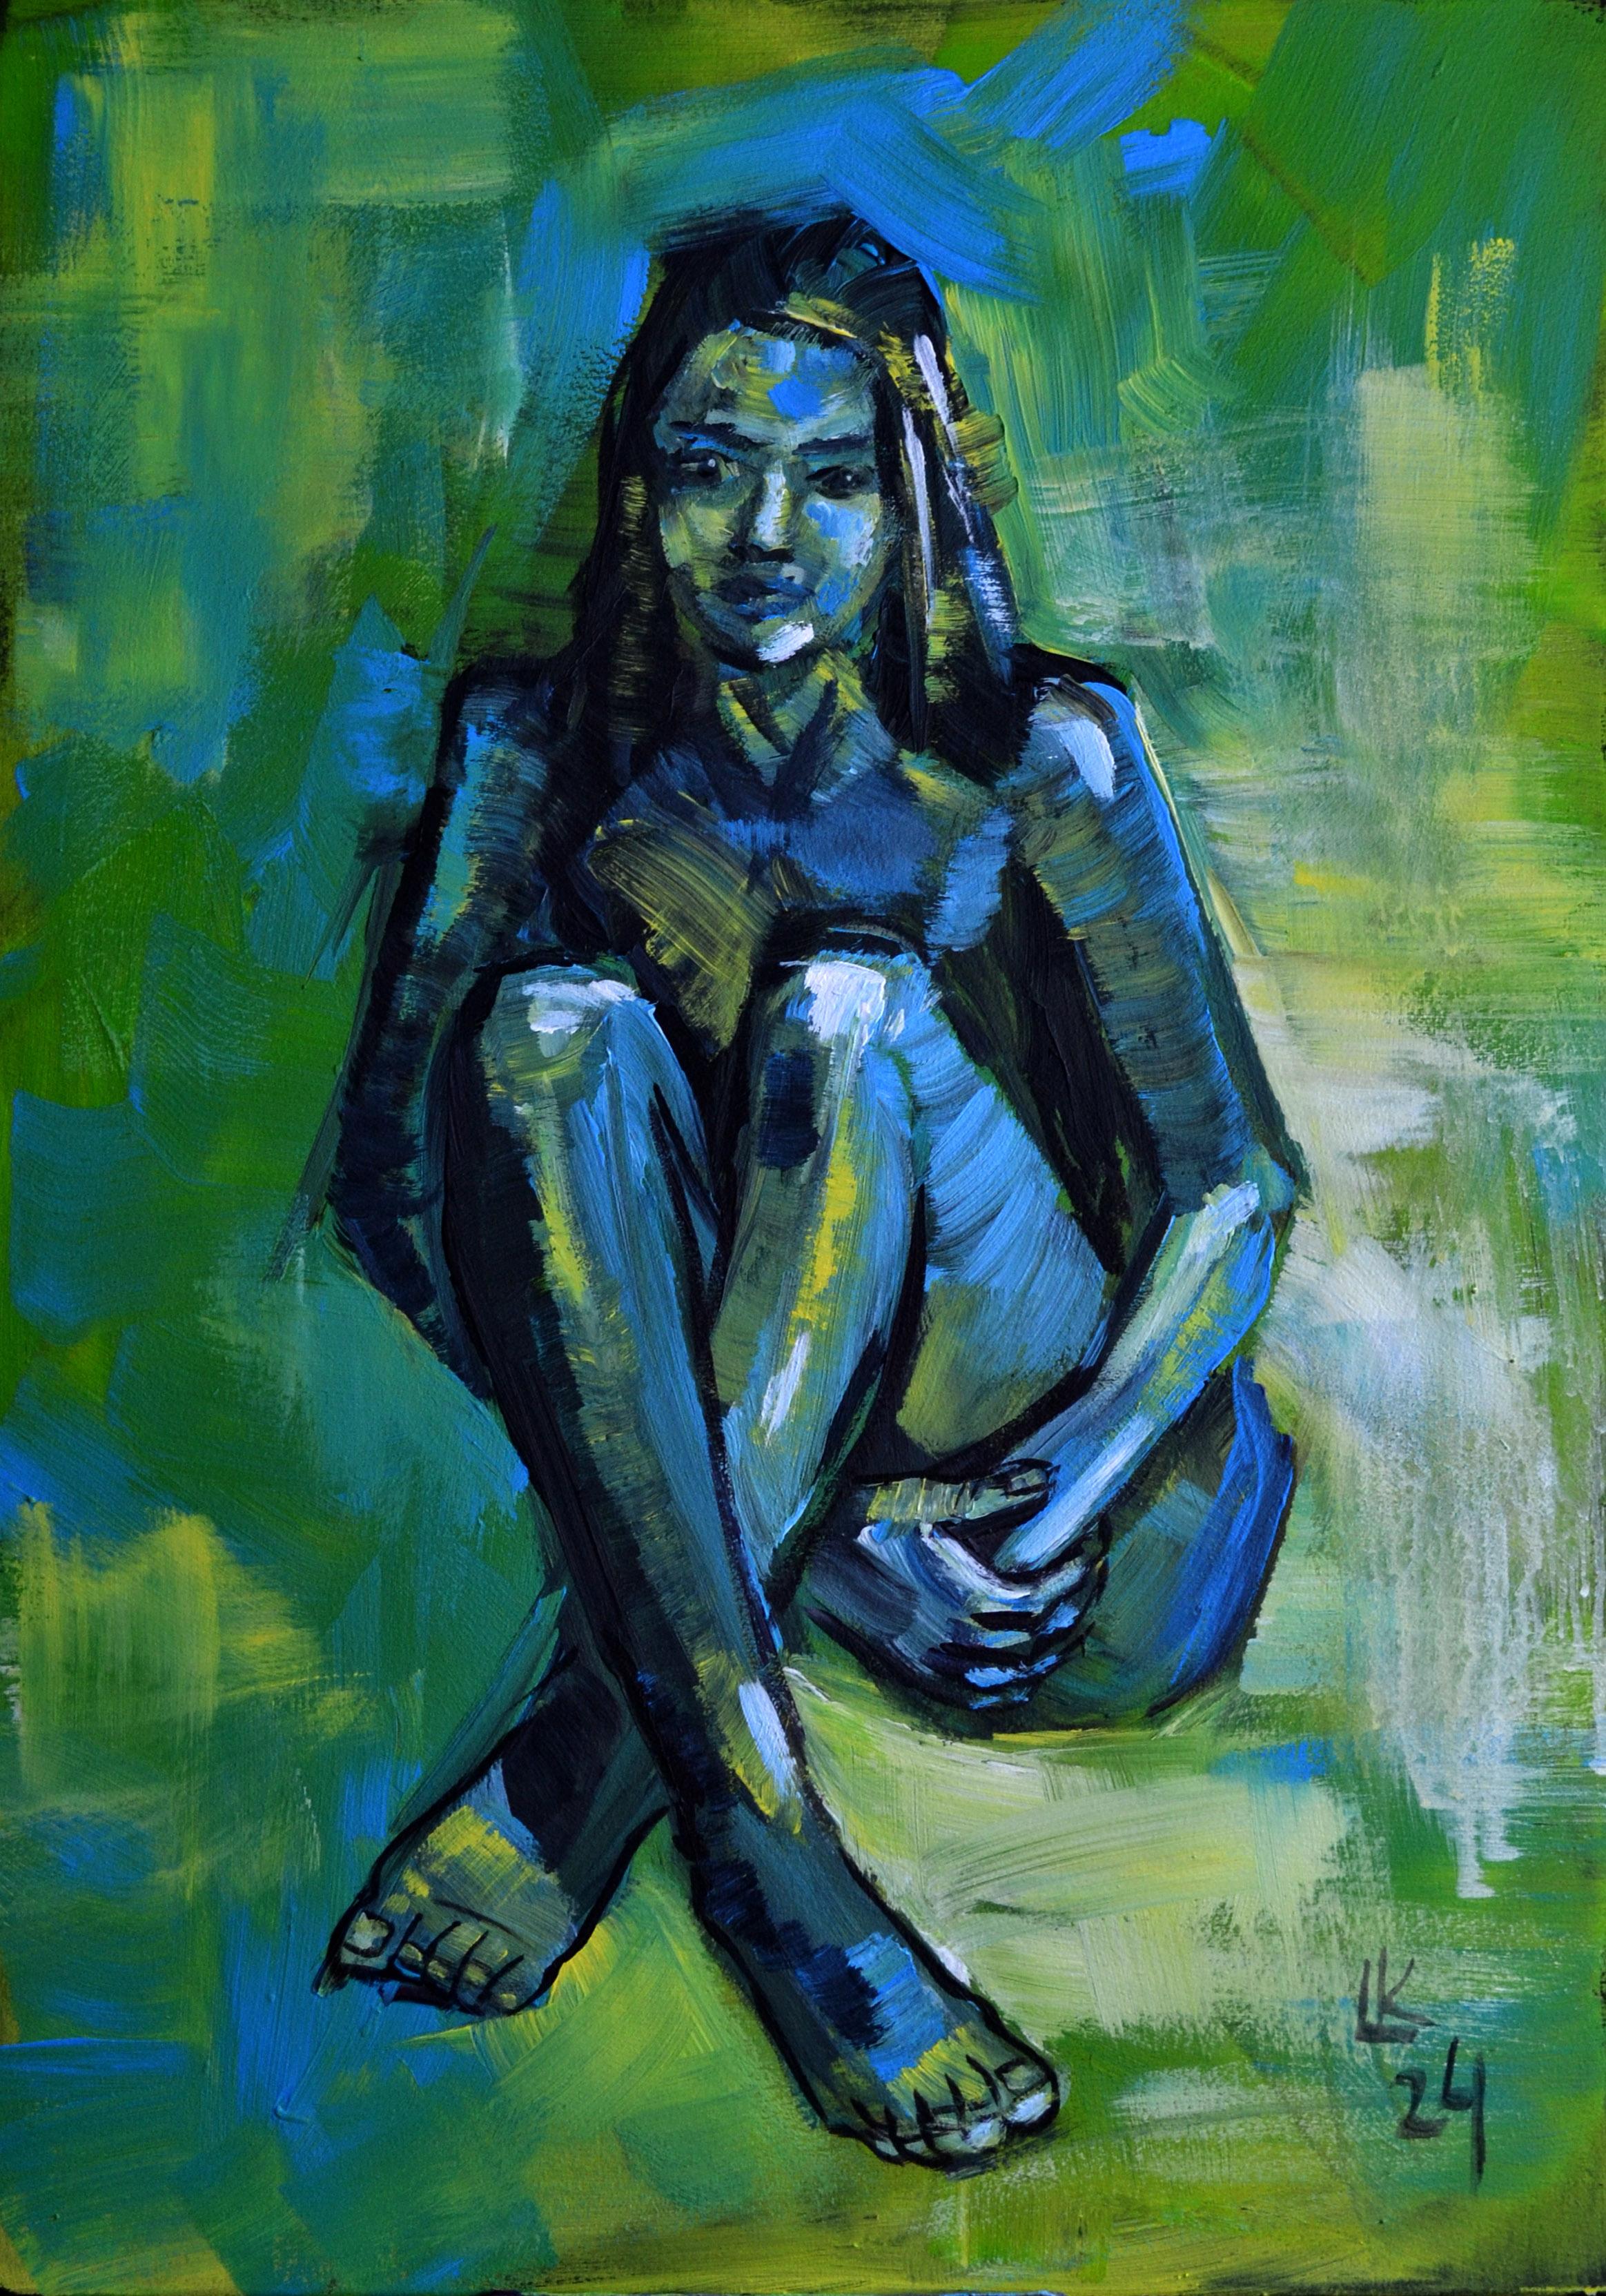 This original acrylic painting, rendered on a quality stretched canvas measuring 50 cm in width and 70 cm in height, compellingly explores the human form through a vibrant interplay of colors. 
The subject, a thoughtful figure seated with knees